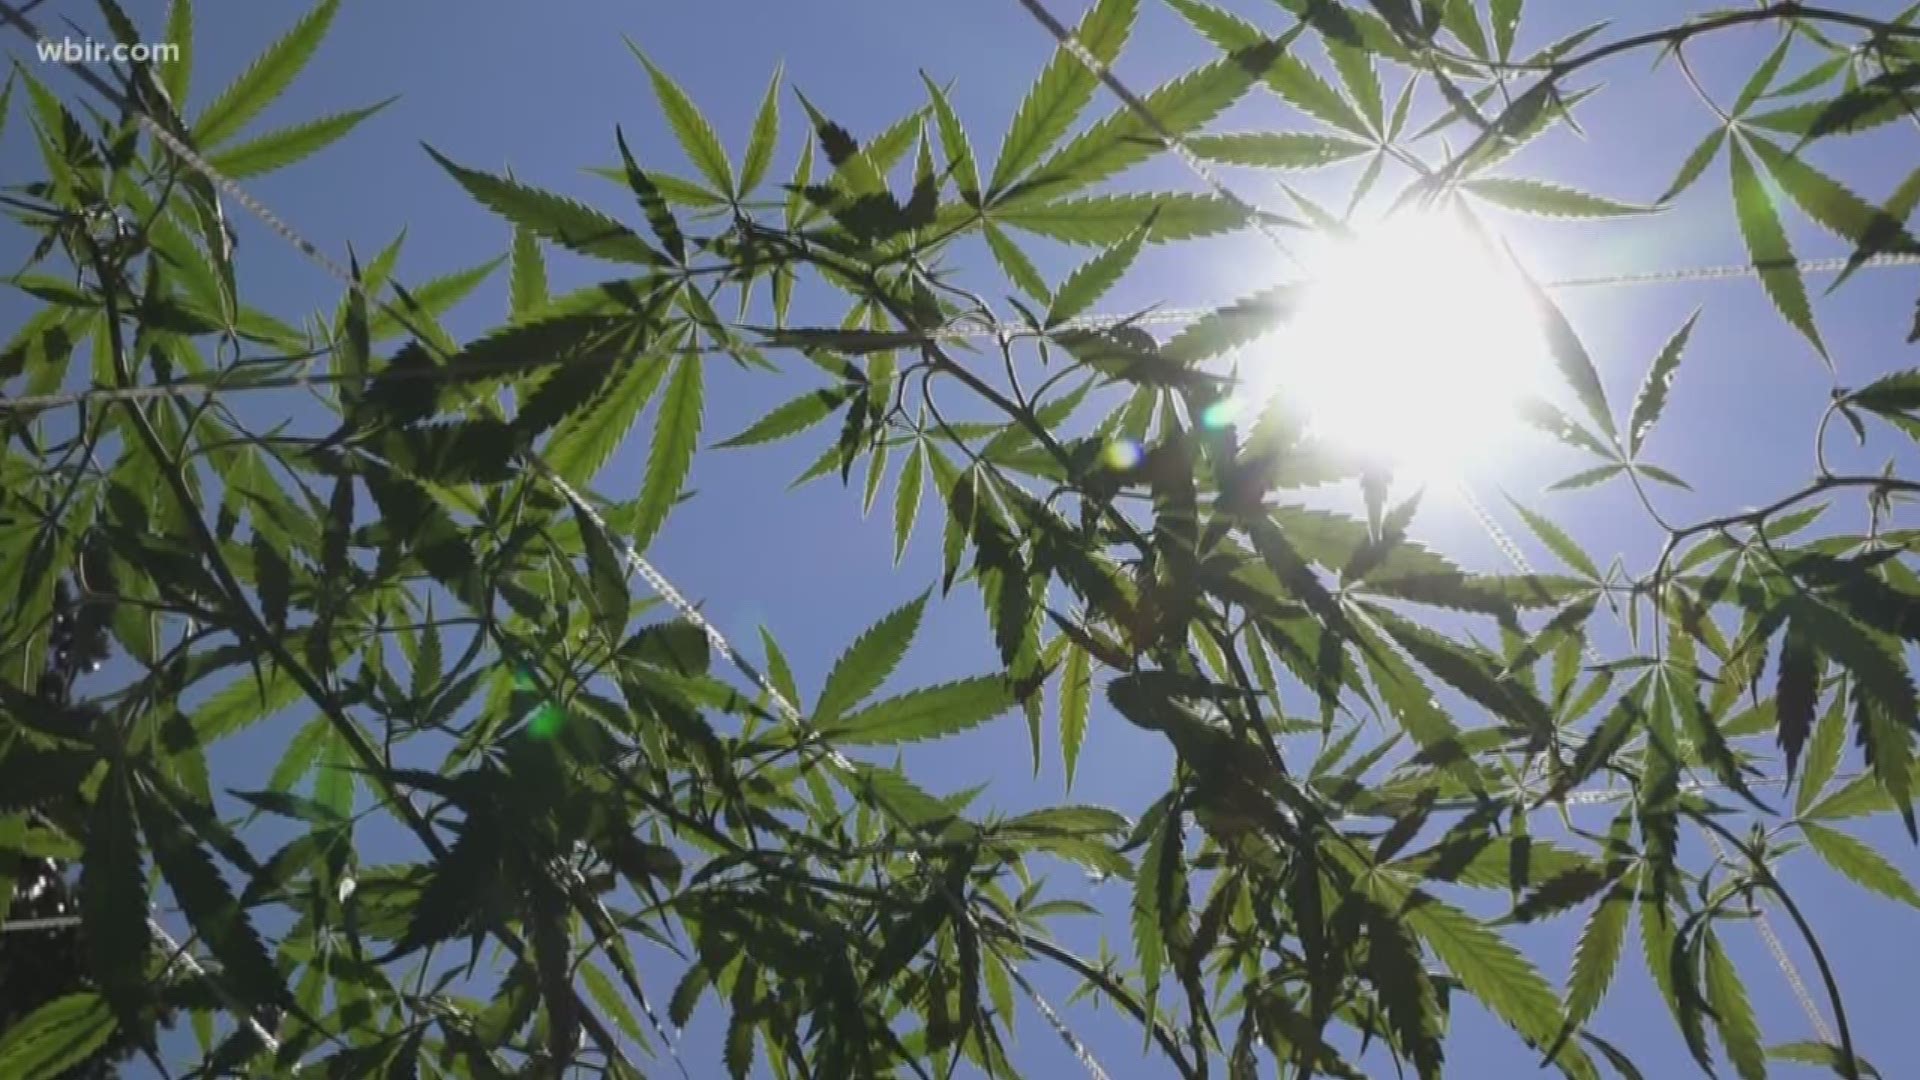 Hemp farming is hard work, but the crop's appeal is skyrocketing in Tennessee. For prospective hemp farmers -- the deadline to apply for a growers license this cycle is Feb. 15.